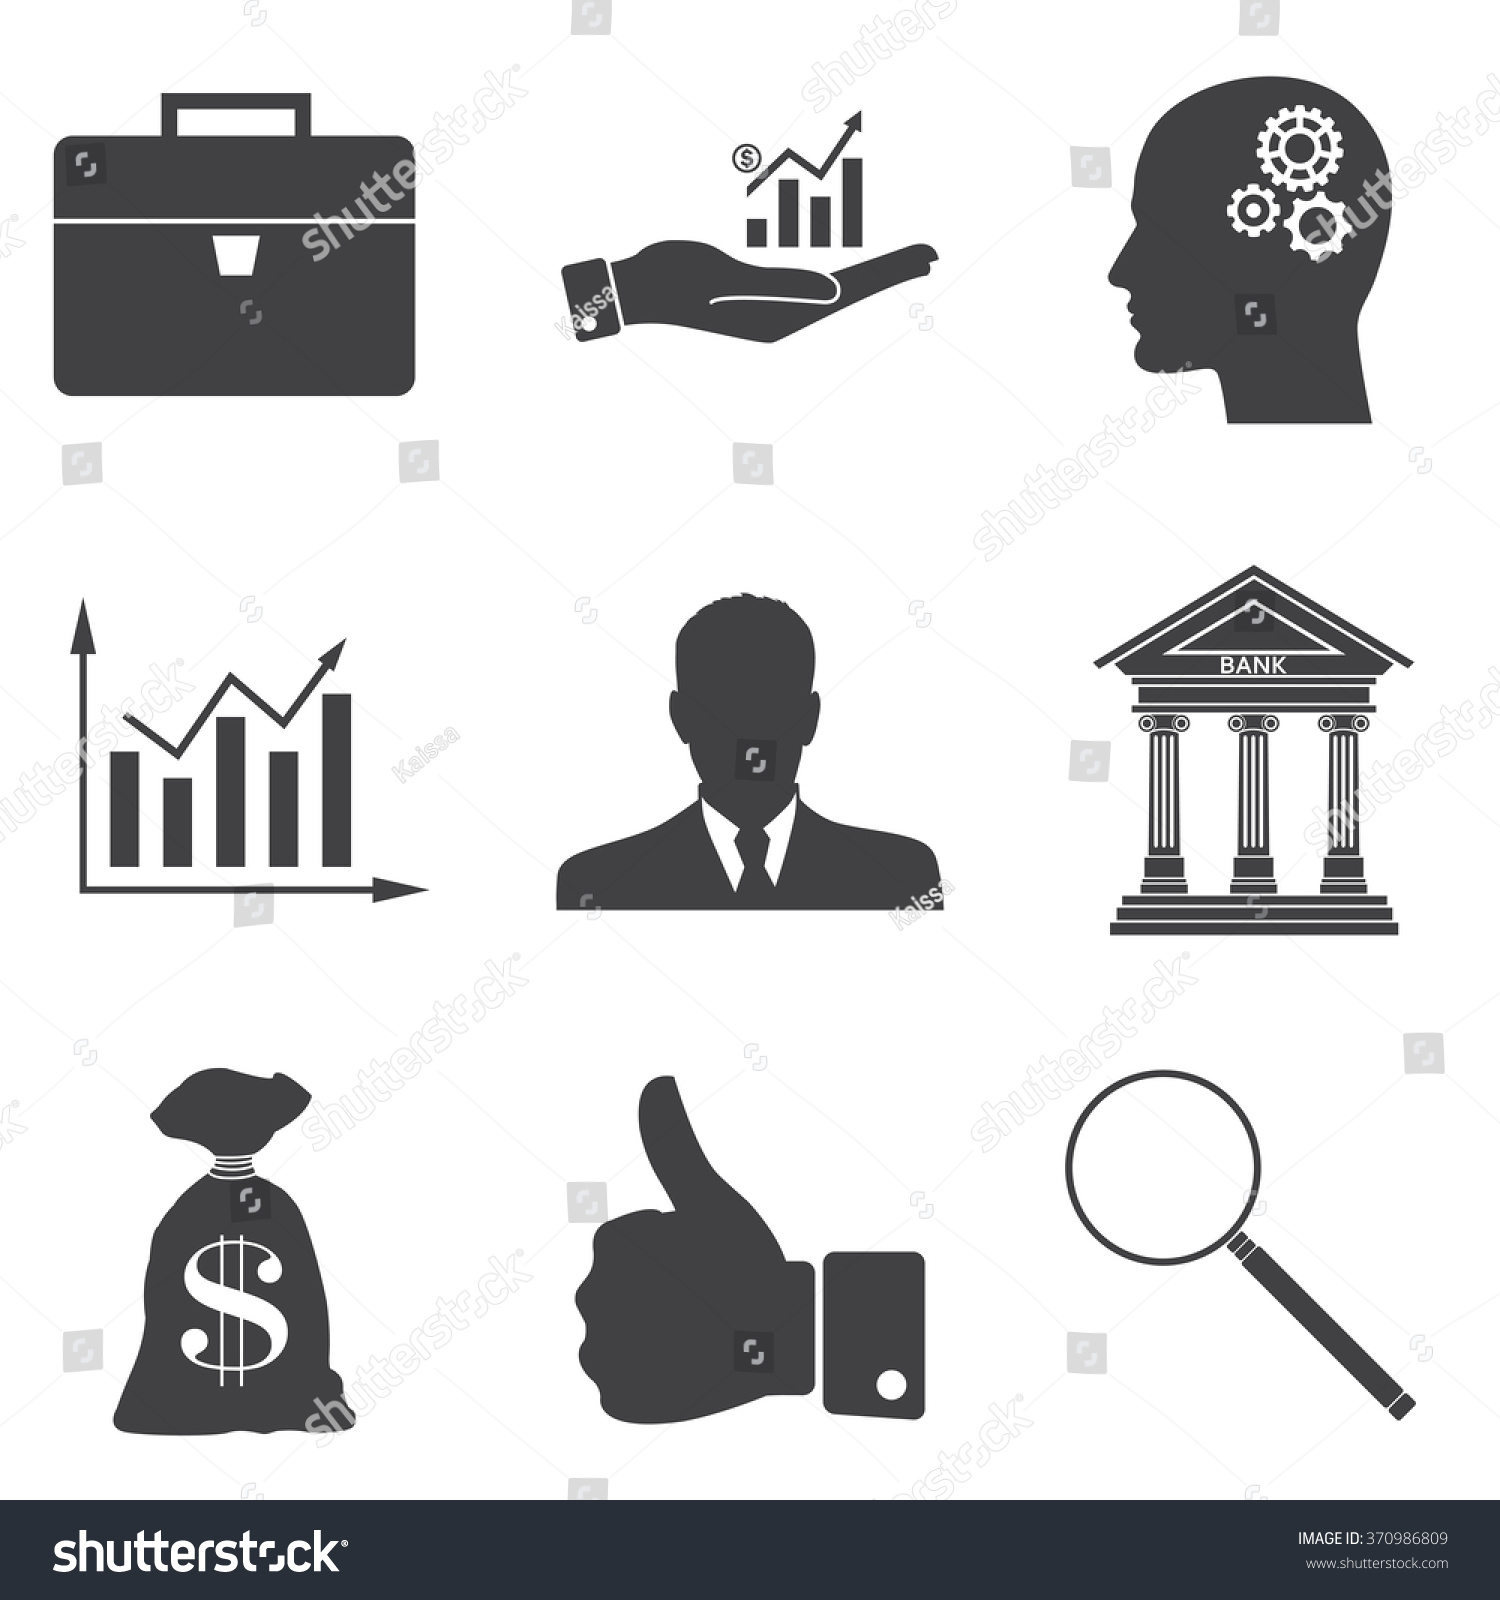 Business Vector Icon. - 370986809 : Shutterstock